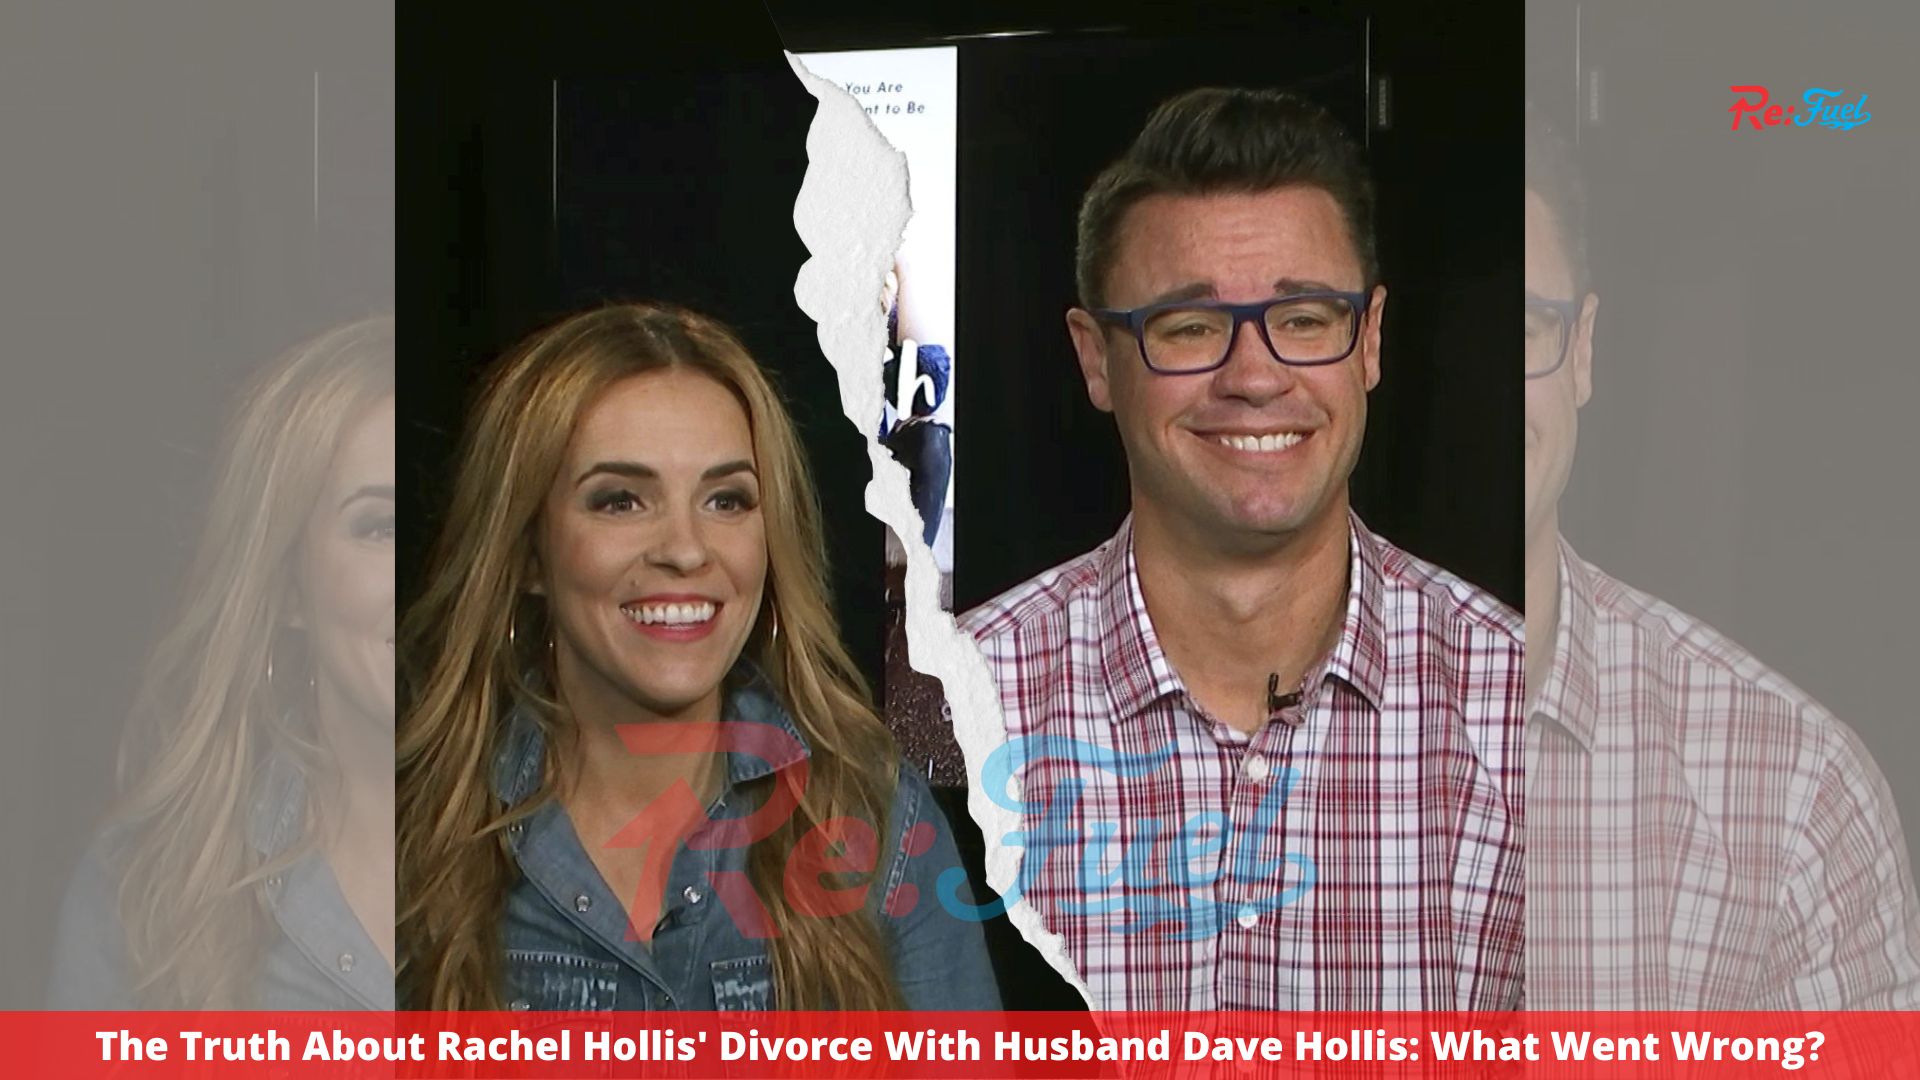 The Truth About Rachel Hollis' Divorce With Husband Dave Hollis: What Went Wrong?